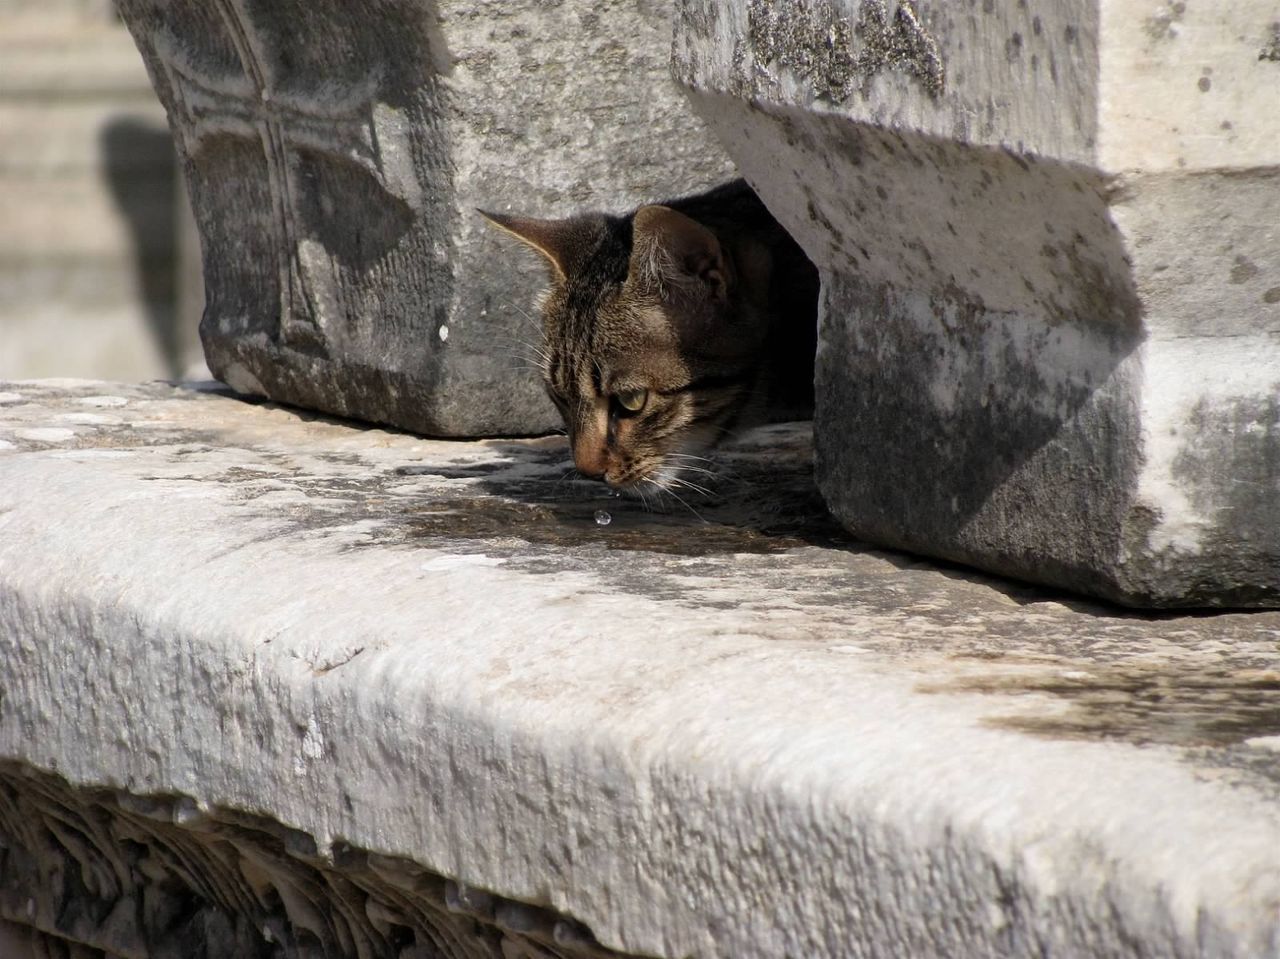 Stray cat drinking water from puddle on retaining wall